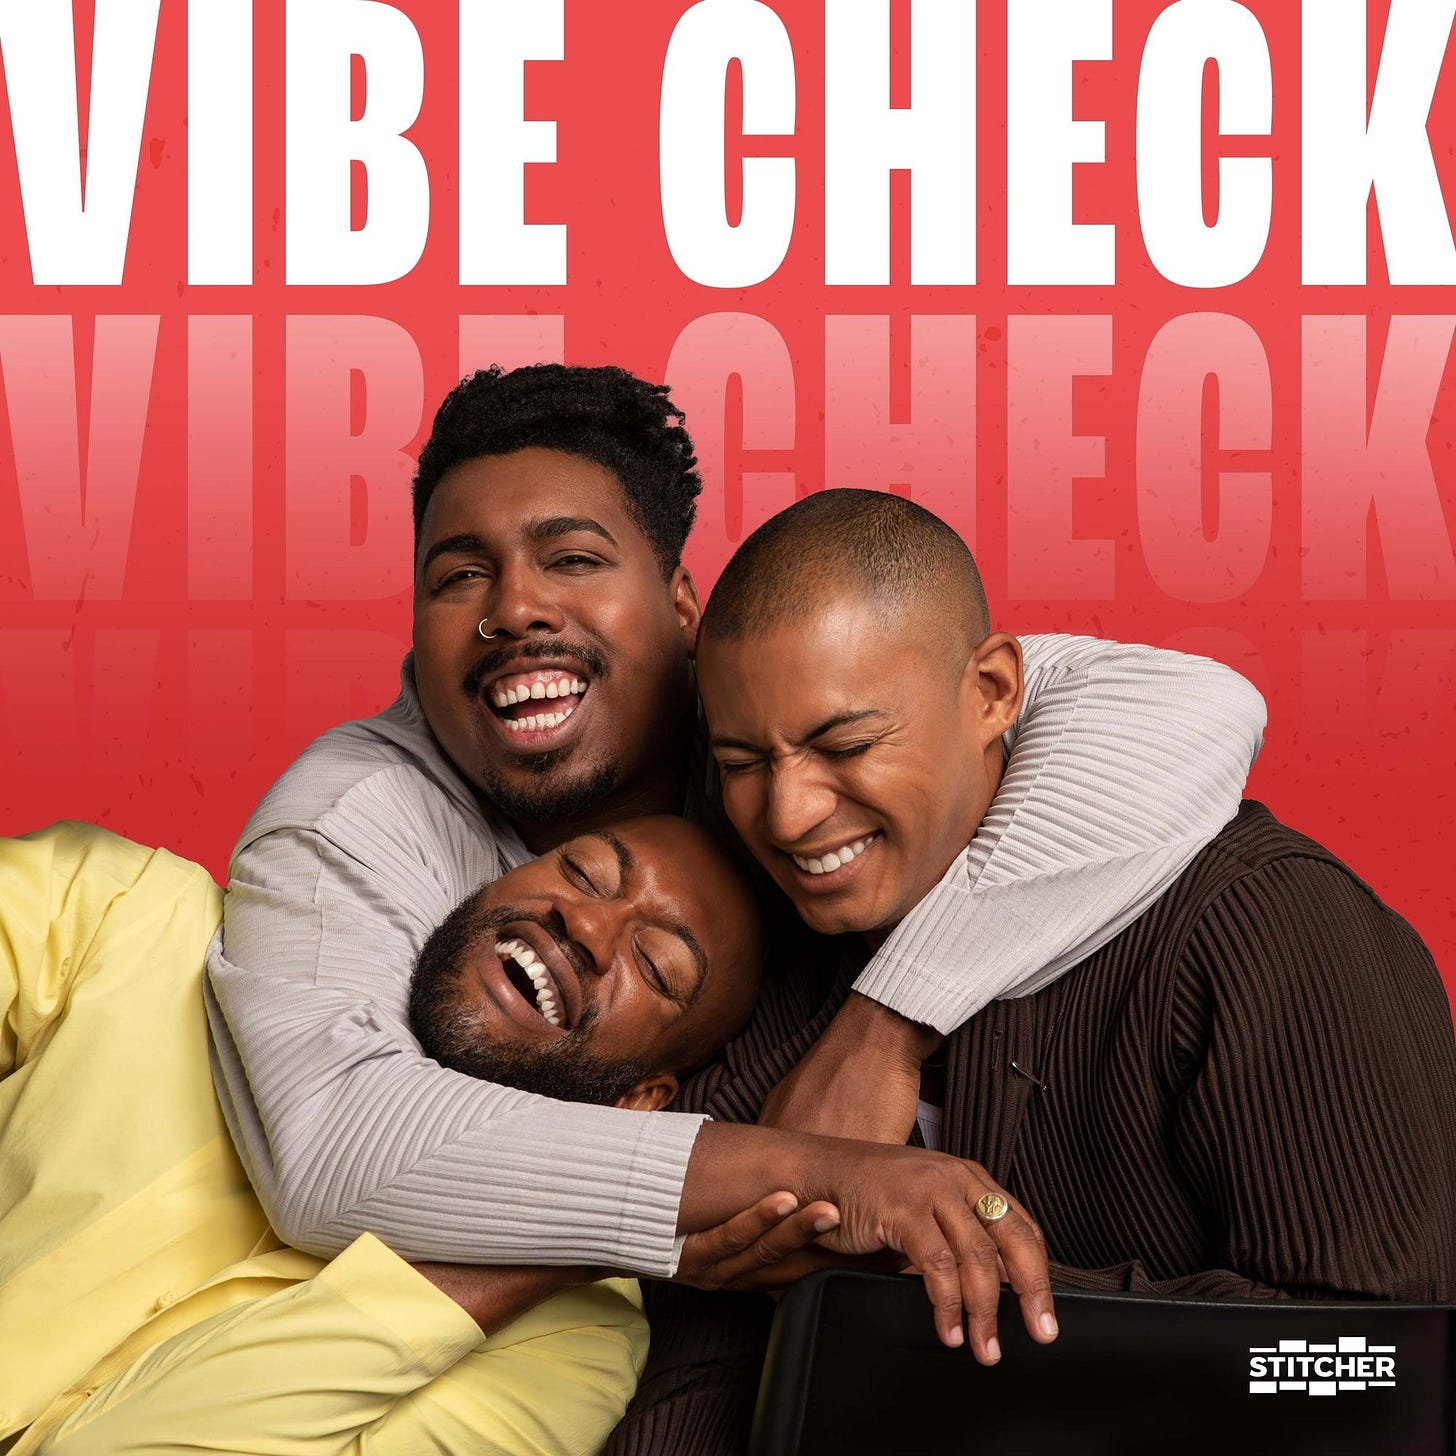 Cover art for Vibe Check with Sam, Saeed, and Zach huddled together.